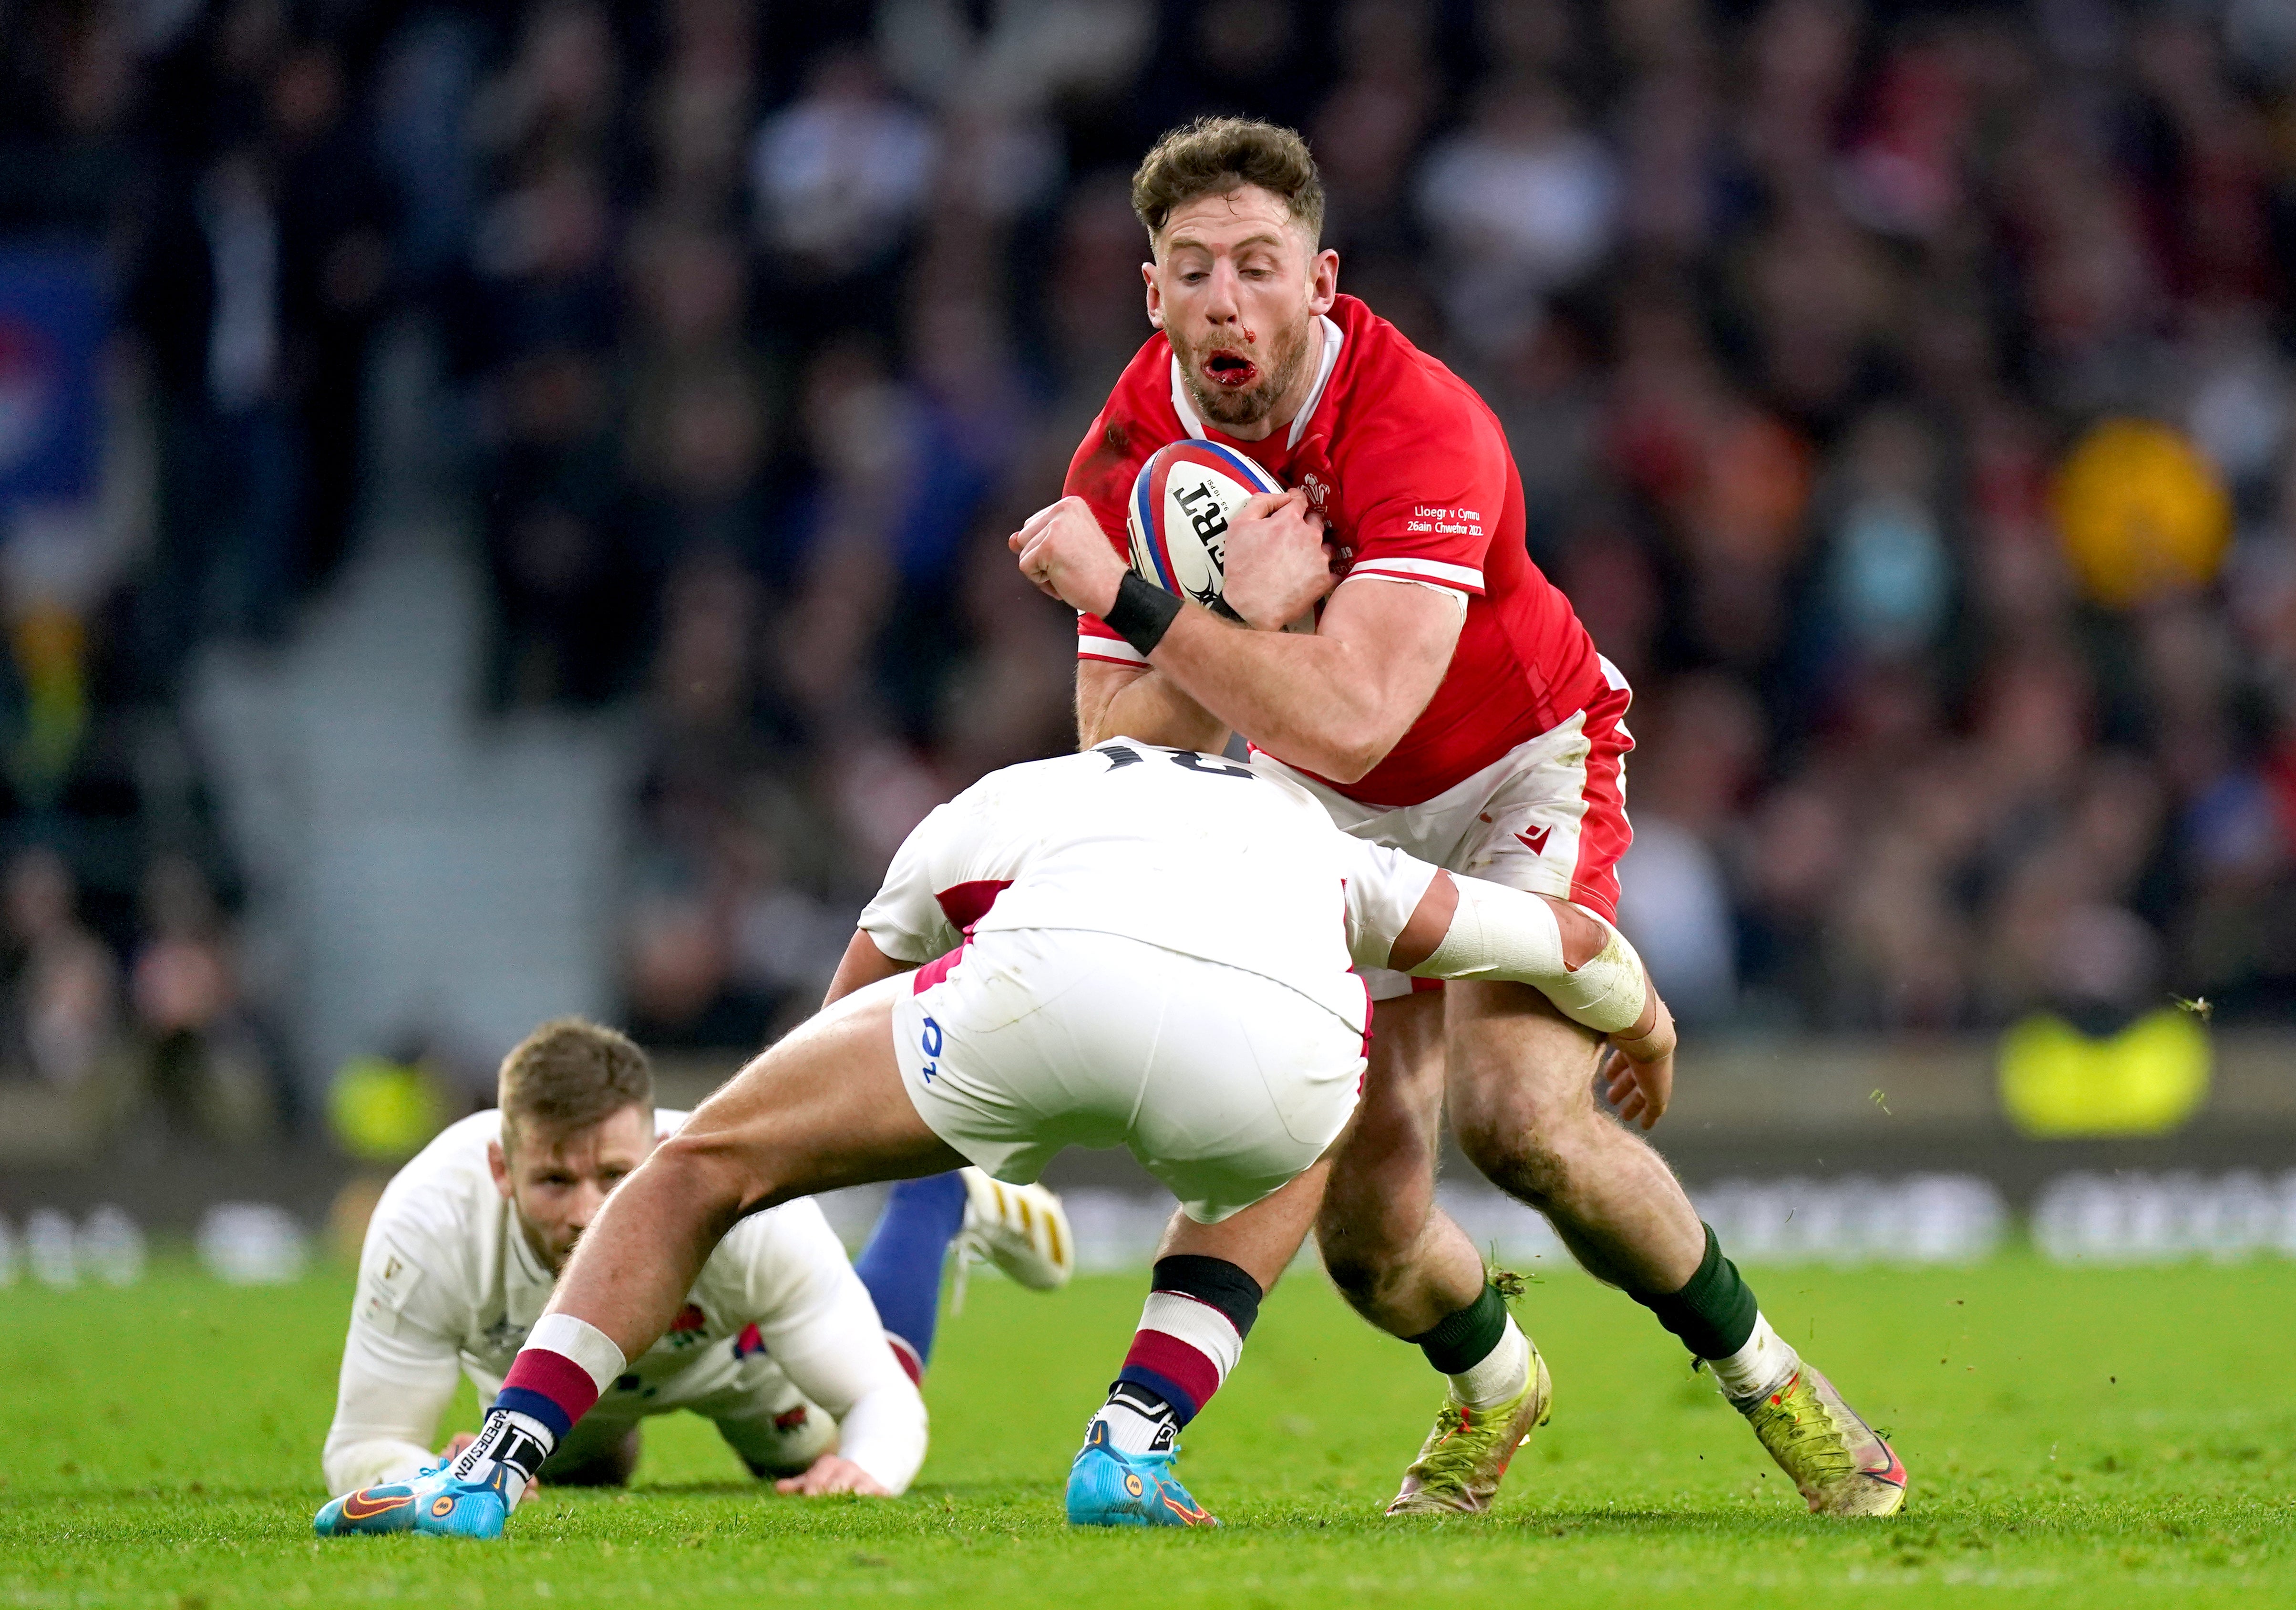 Wales wing Alex Cuthbert impressed against England